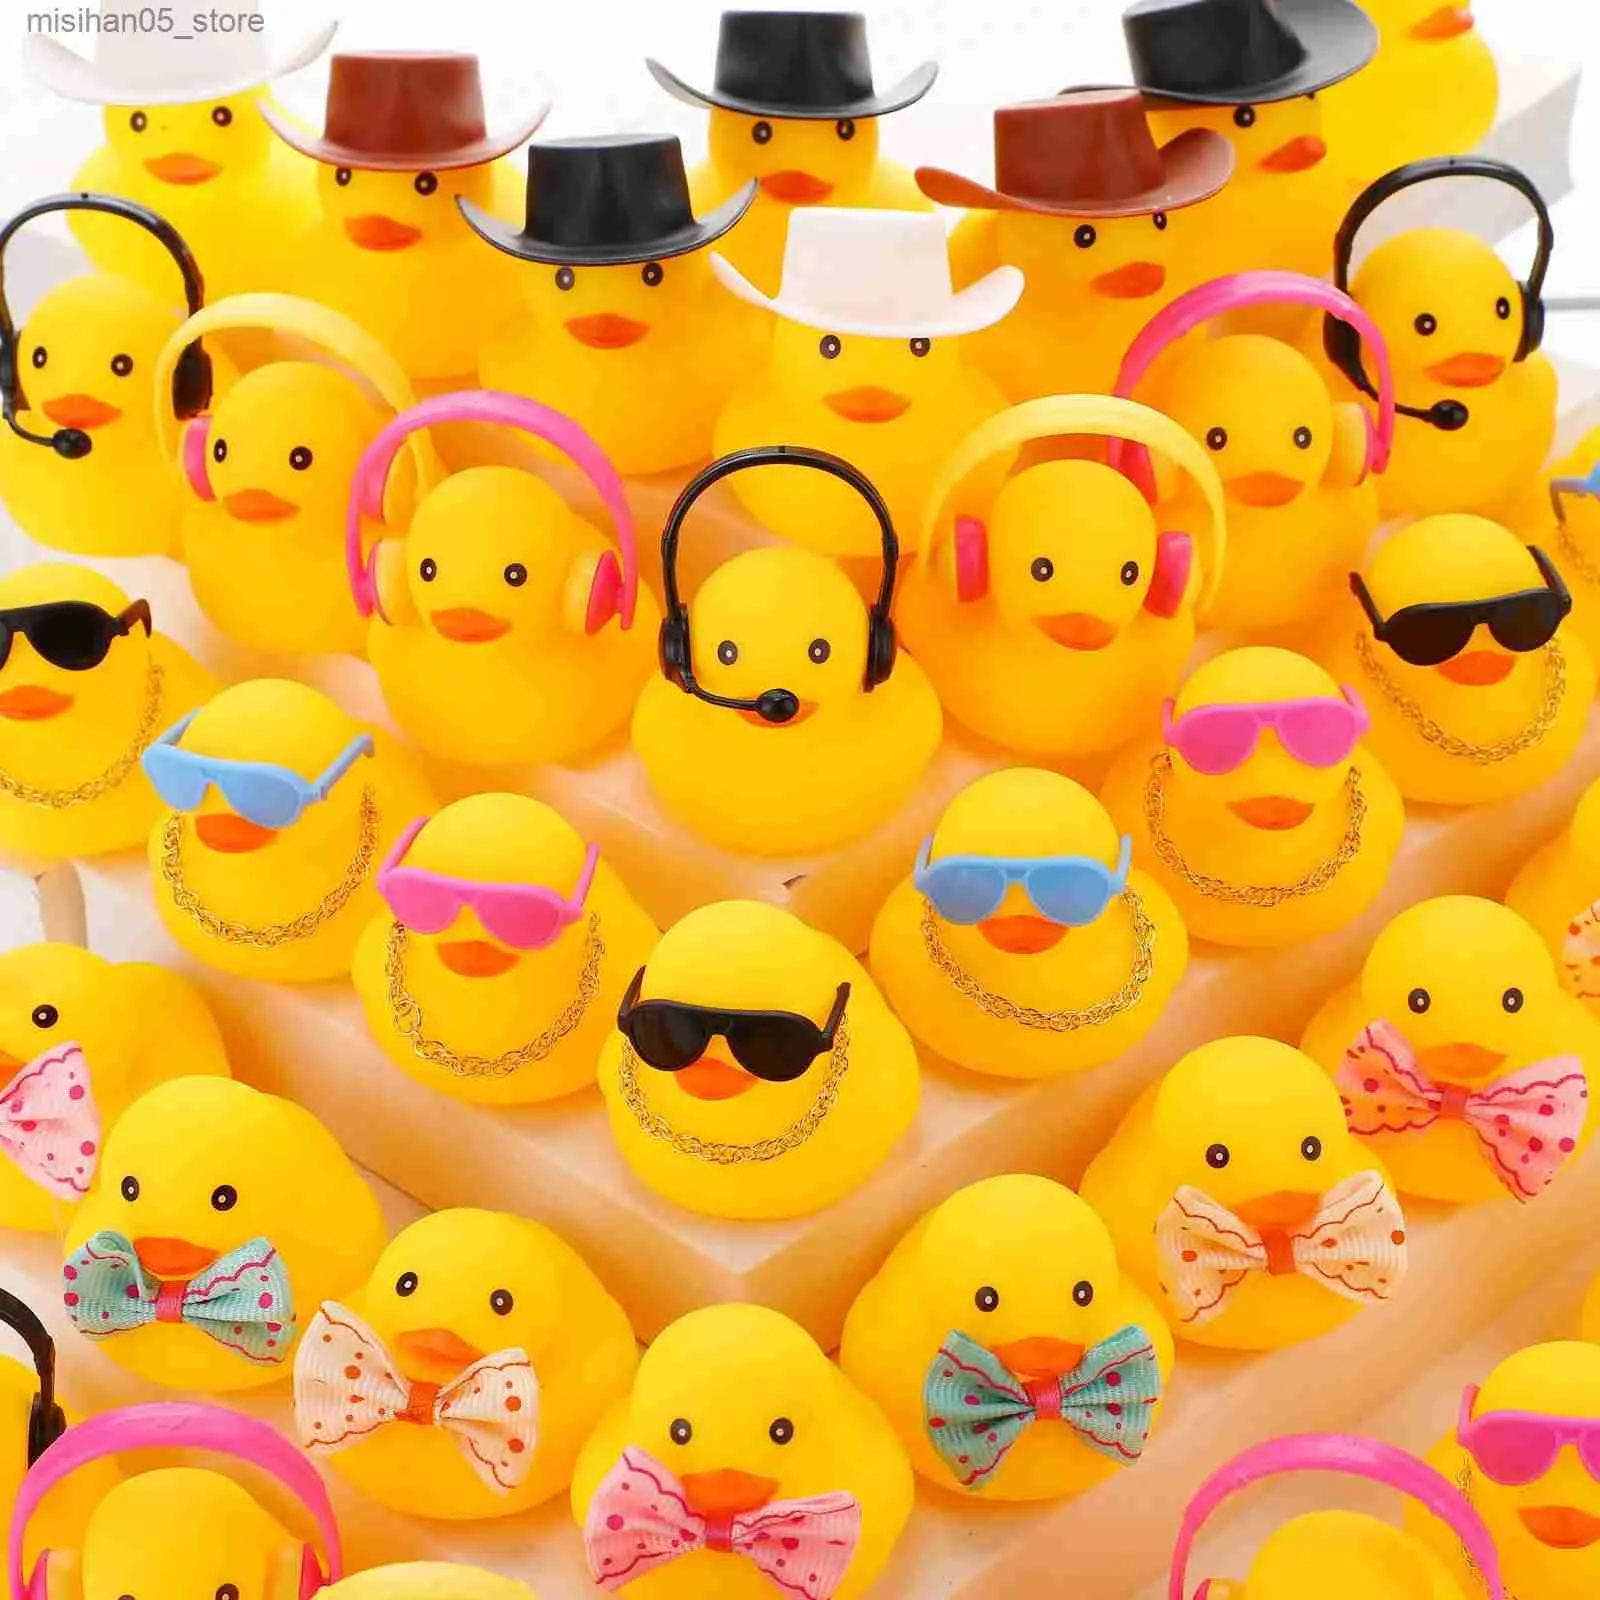 Sand Play Water Fun 48 pieces of rubber duck bath toys loose yellow duck car decoration childrens shower Christmas party discount Q240426